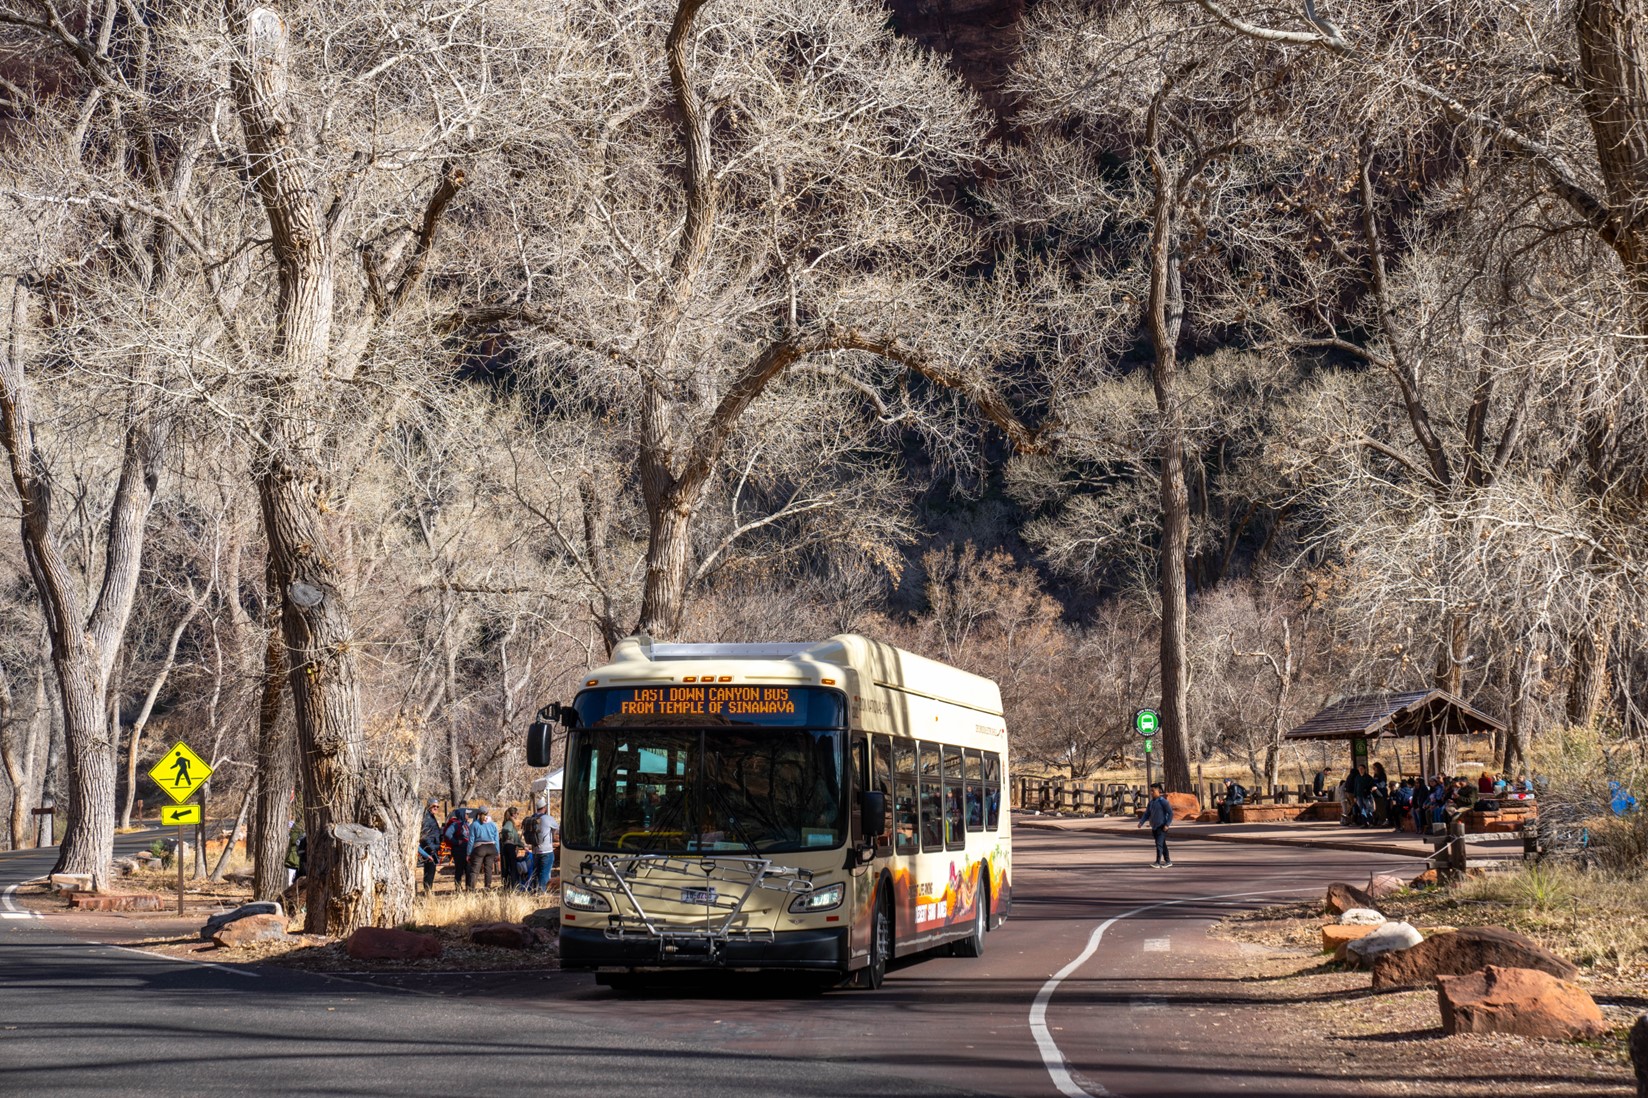 Zion National Park electric shuttle bus departs the Grotto. Trees without leaves surround the bus and a line of visitors waiting to board other buses wait at the stop.